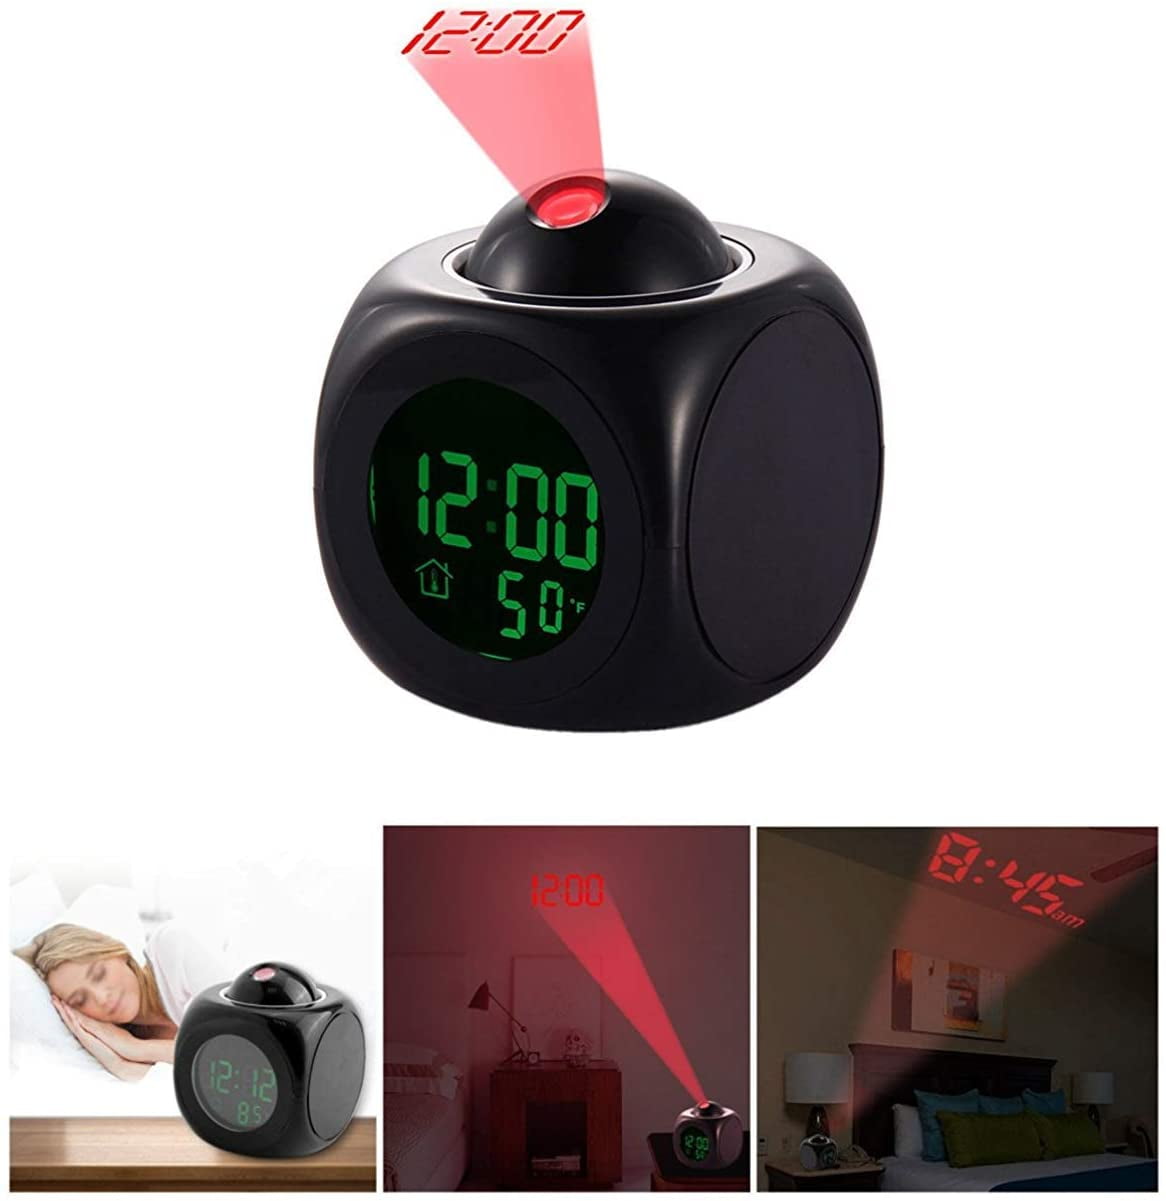 Digital Projection Alarm Clock With LCD Display Voice Talking LED Projector 